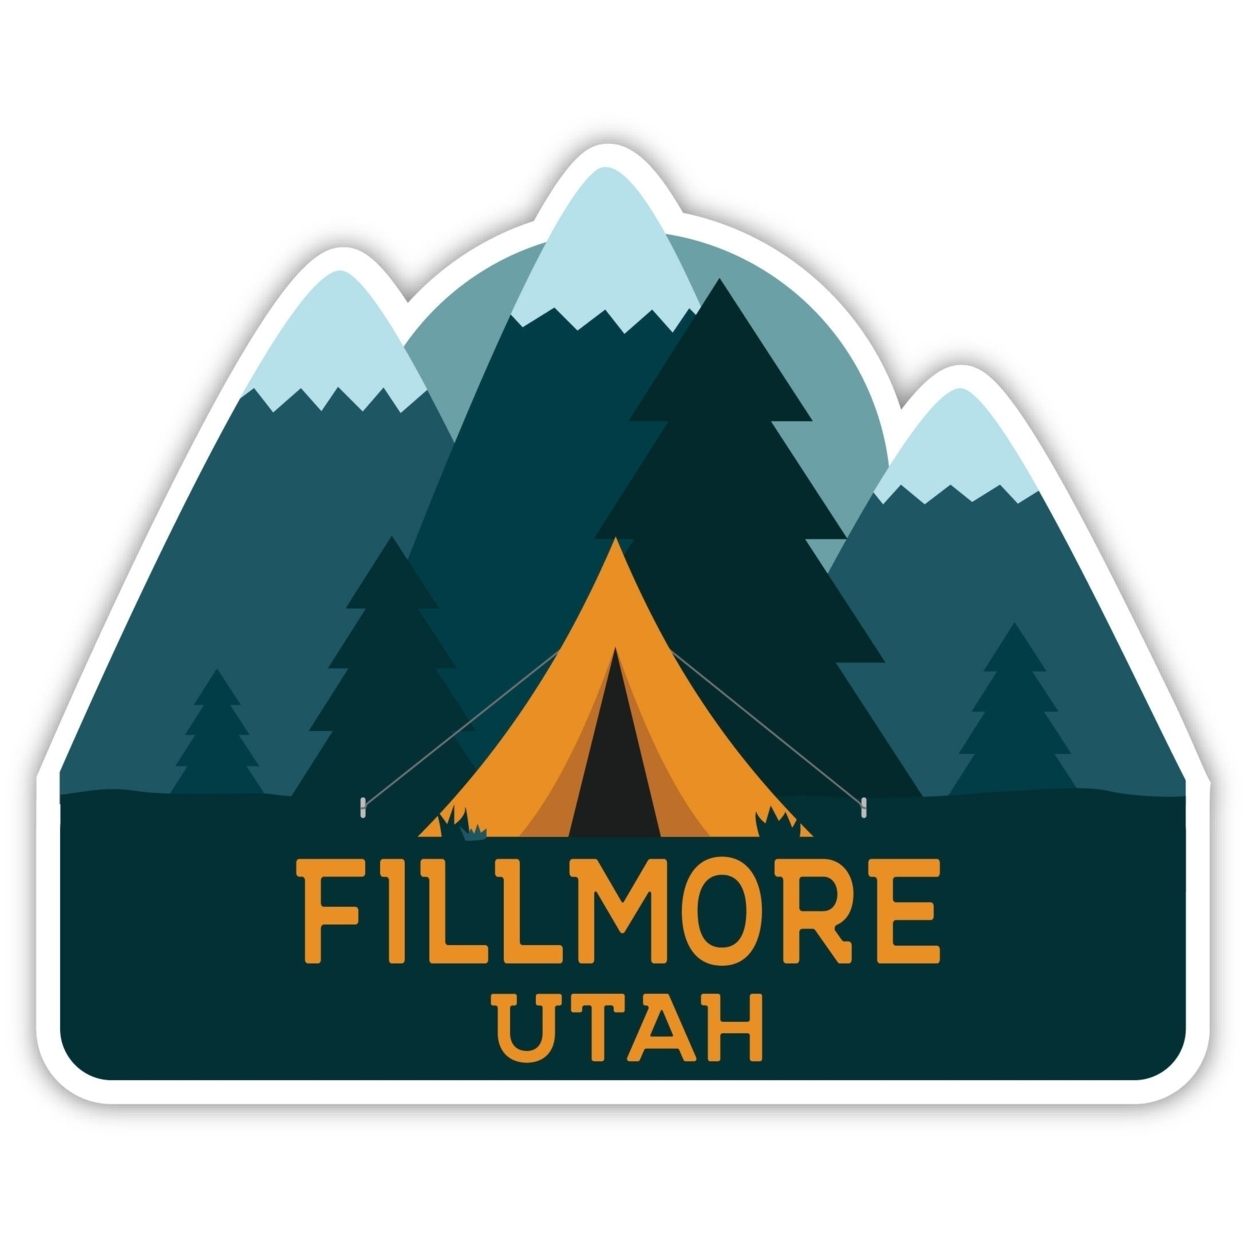 Fillmore Utah Souvenir Decorative Stickers (Choose Theme And Size) - 4-Pack, 8-Inch, Adventures Awaits